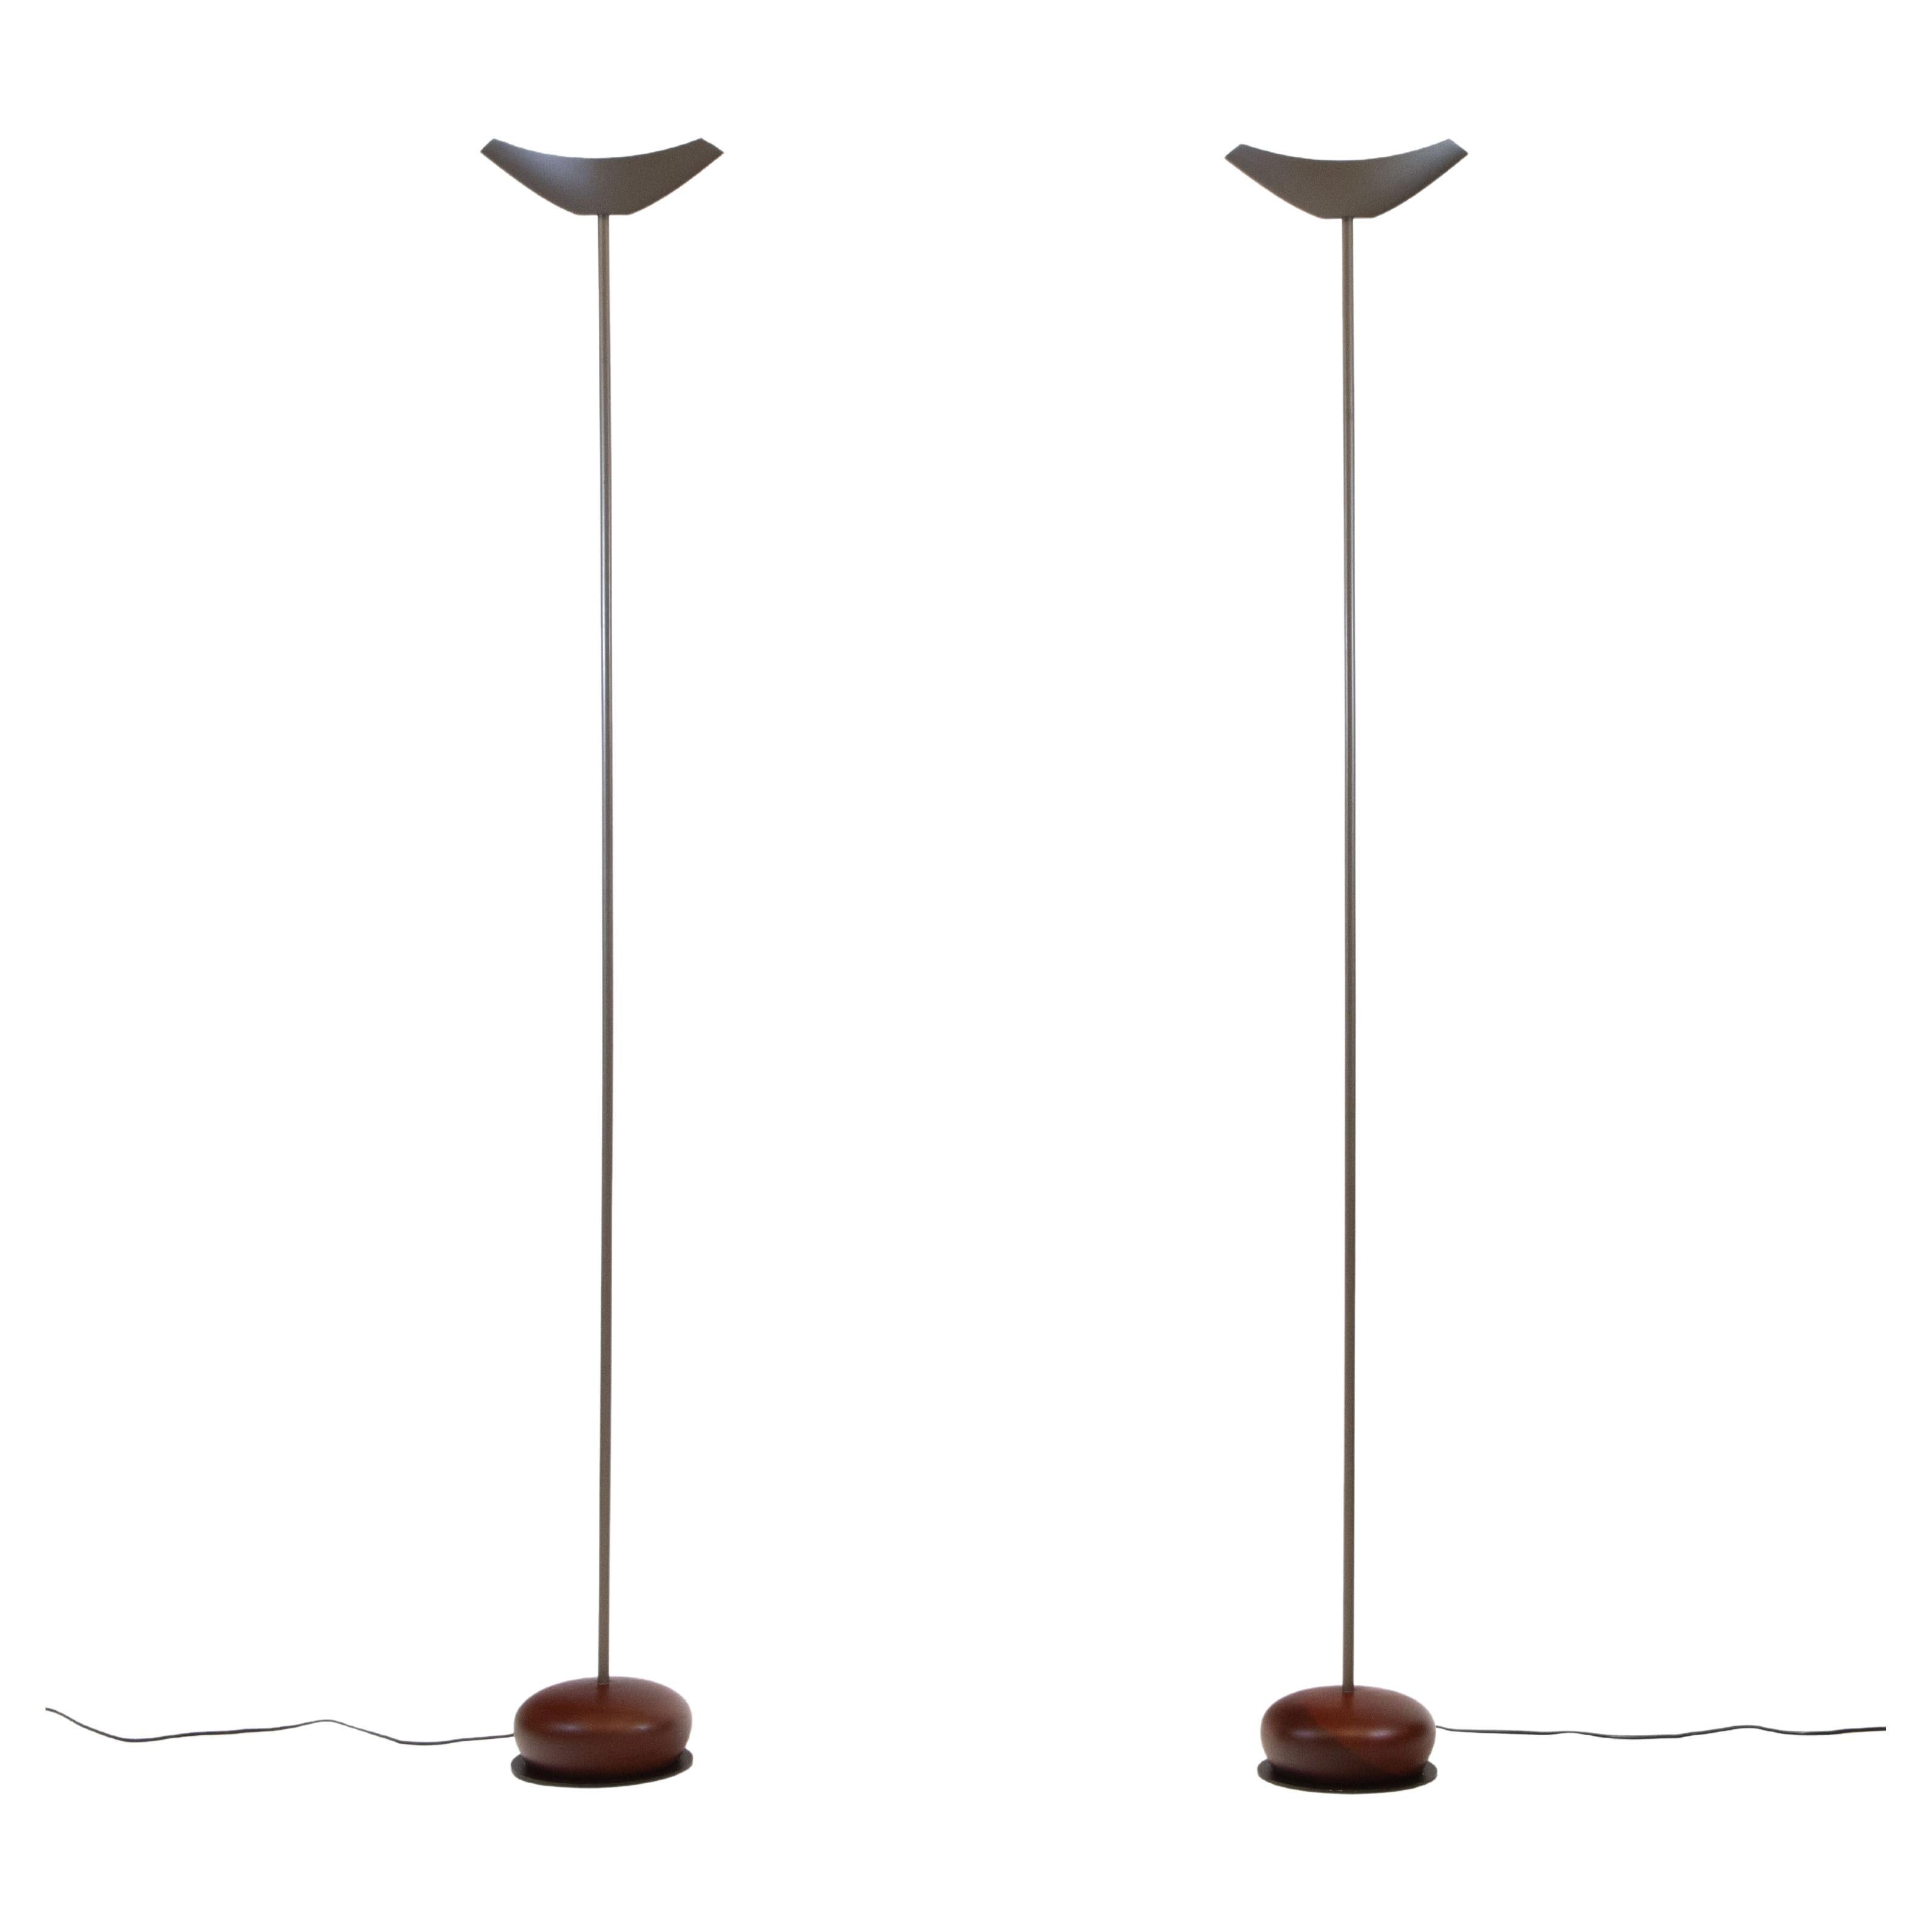 Pair Vintage Uplighter Floor Lamps By Josep Llusca 'Servul F' For Flos Italy  For Sale